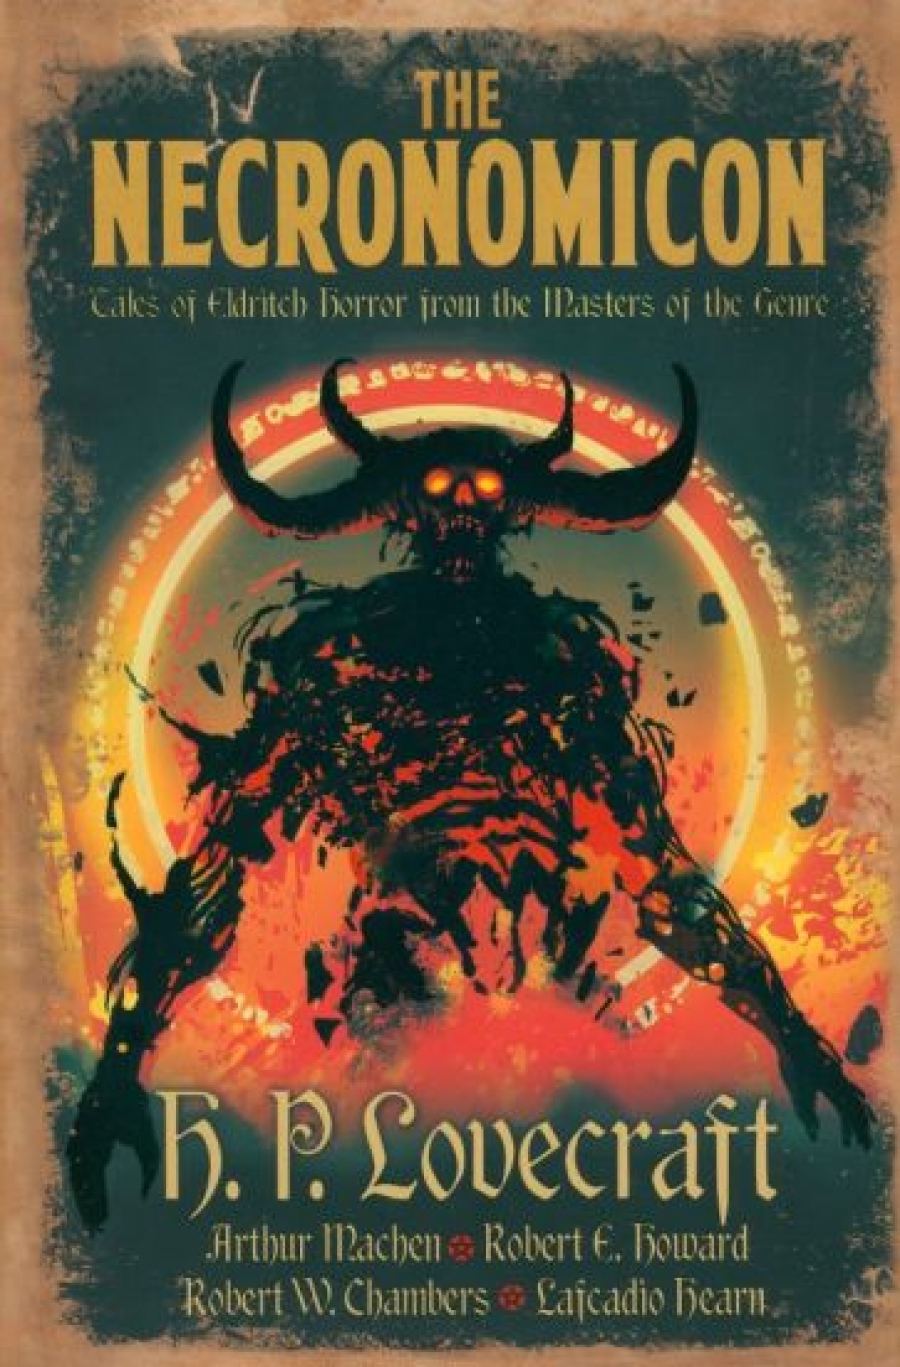 Lovecraft Howard Phillips The Necronomicon. Tales of Eldritch Horror from the Masters of the Genre 